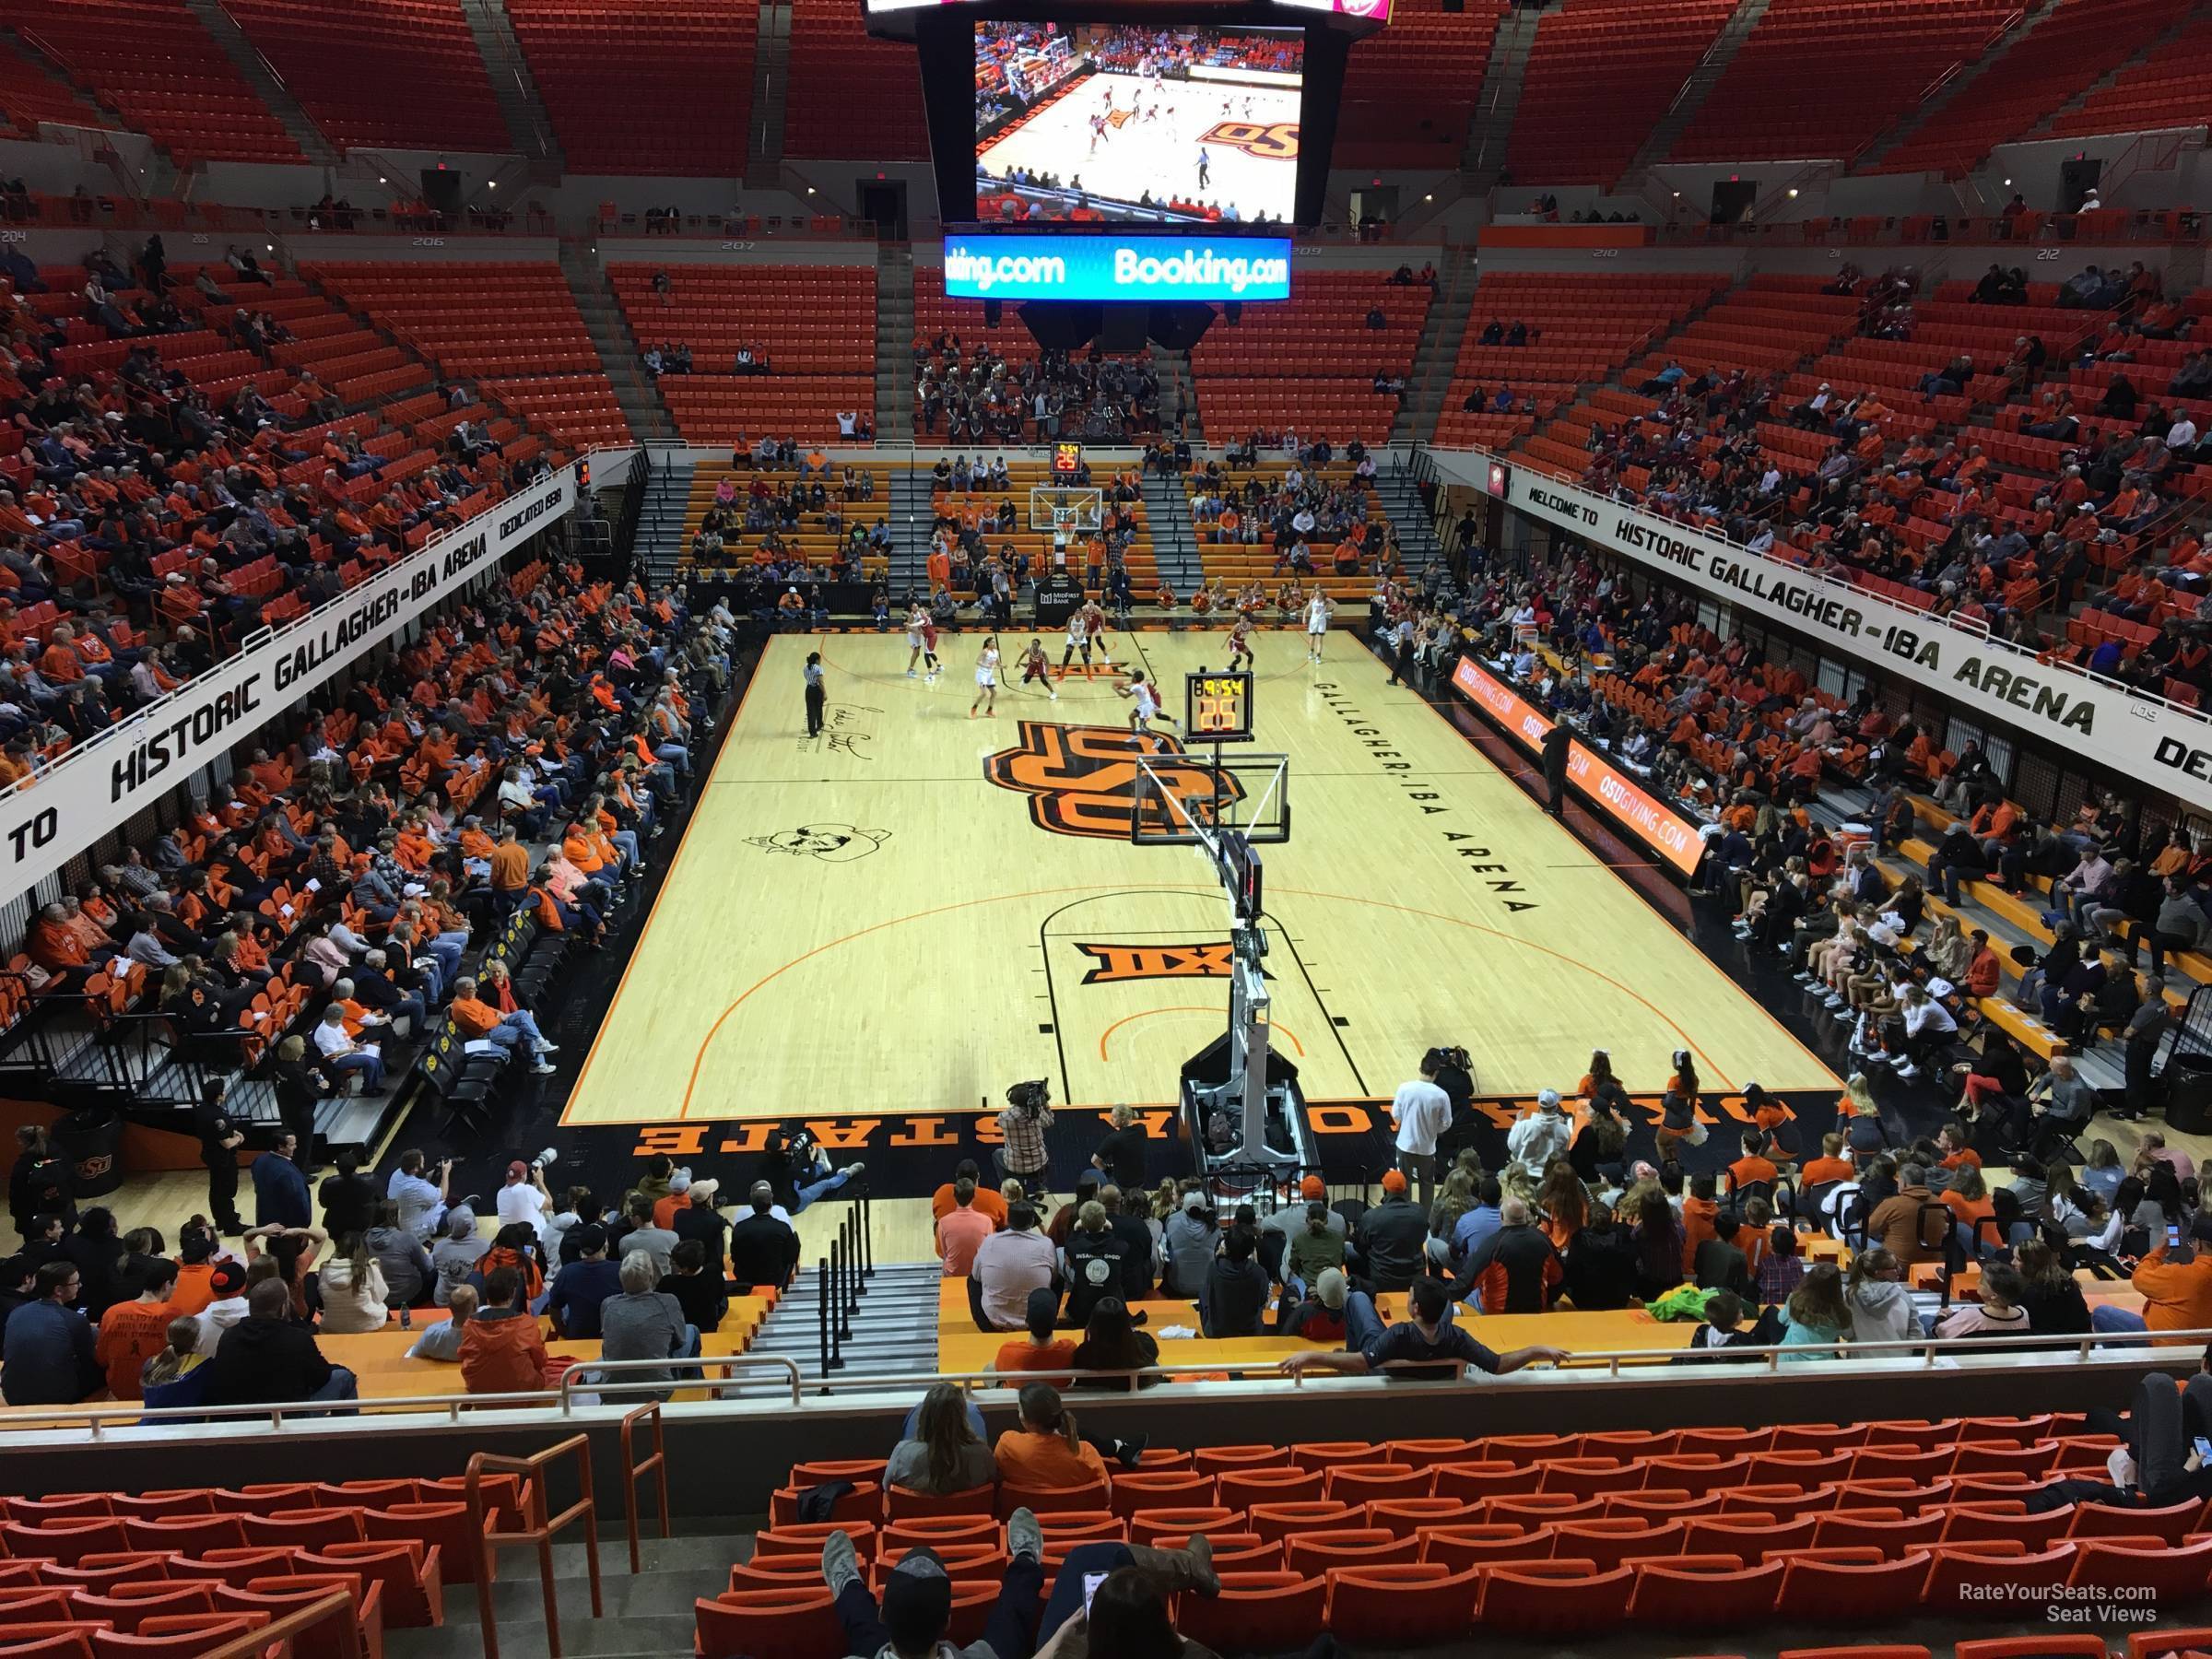 section 218, row 13 seat view  - gallagher-iba arena